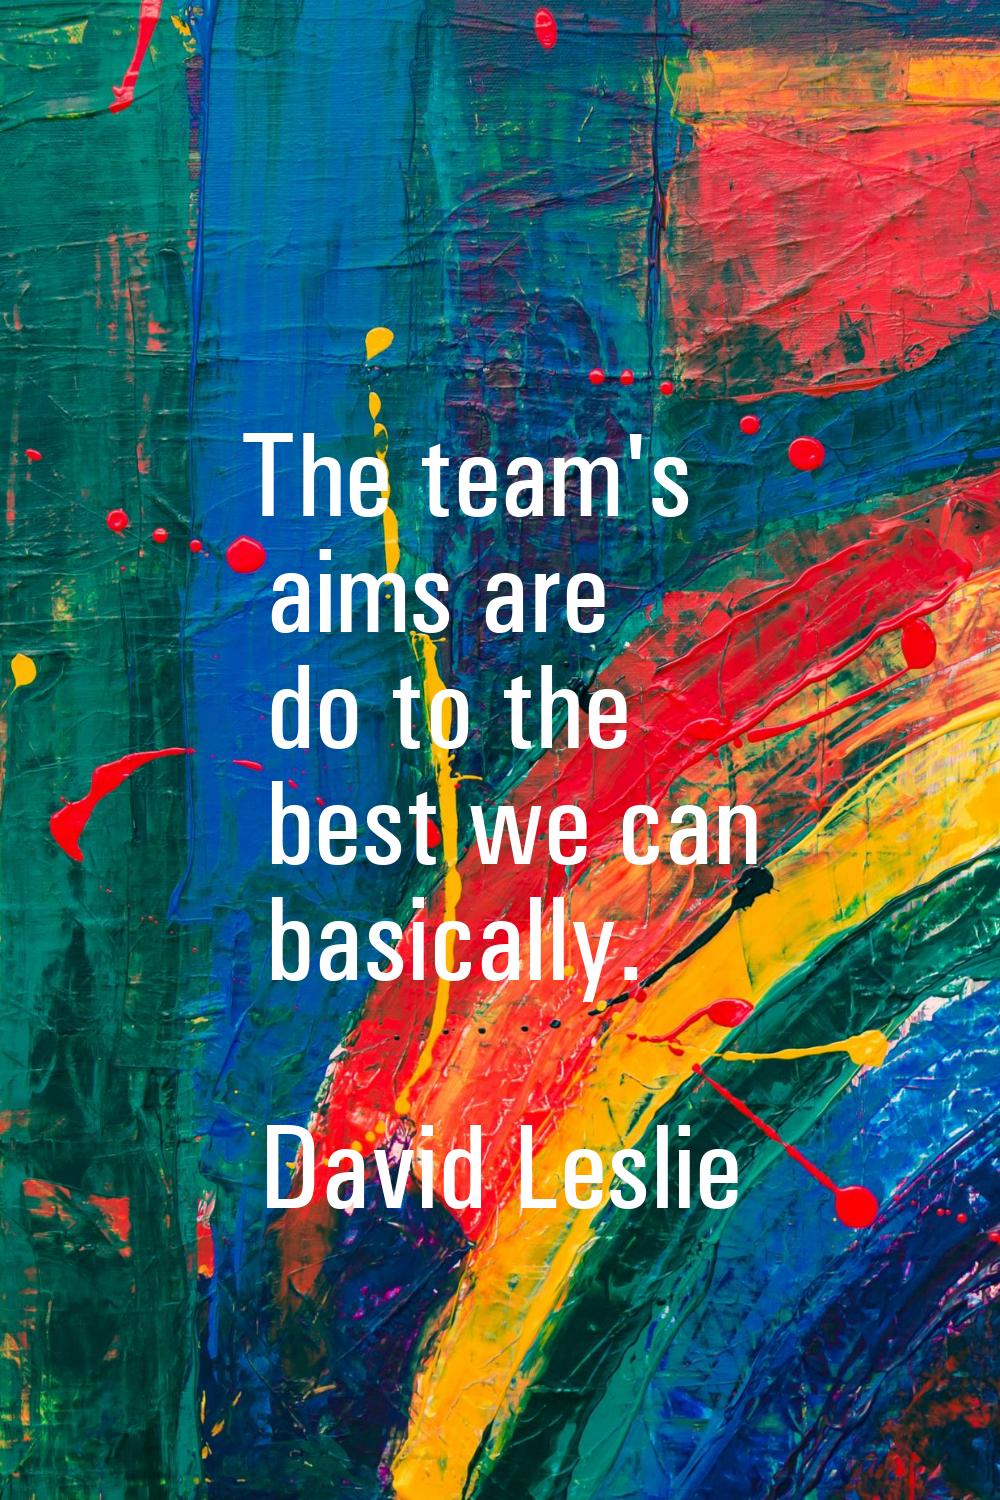 The team's aims are do to the best we can basically.